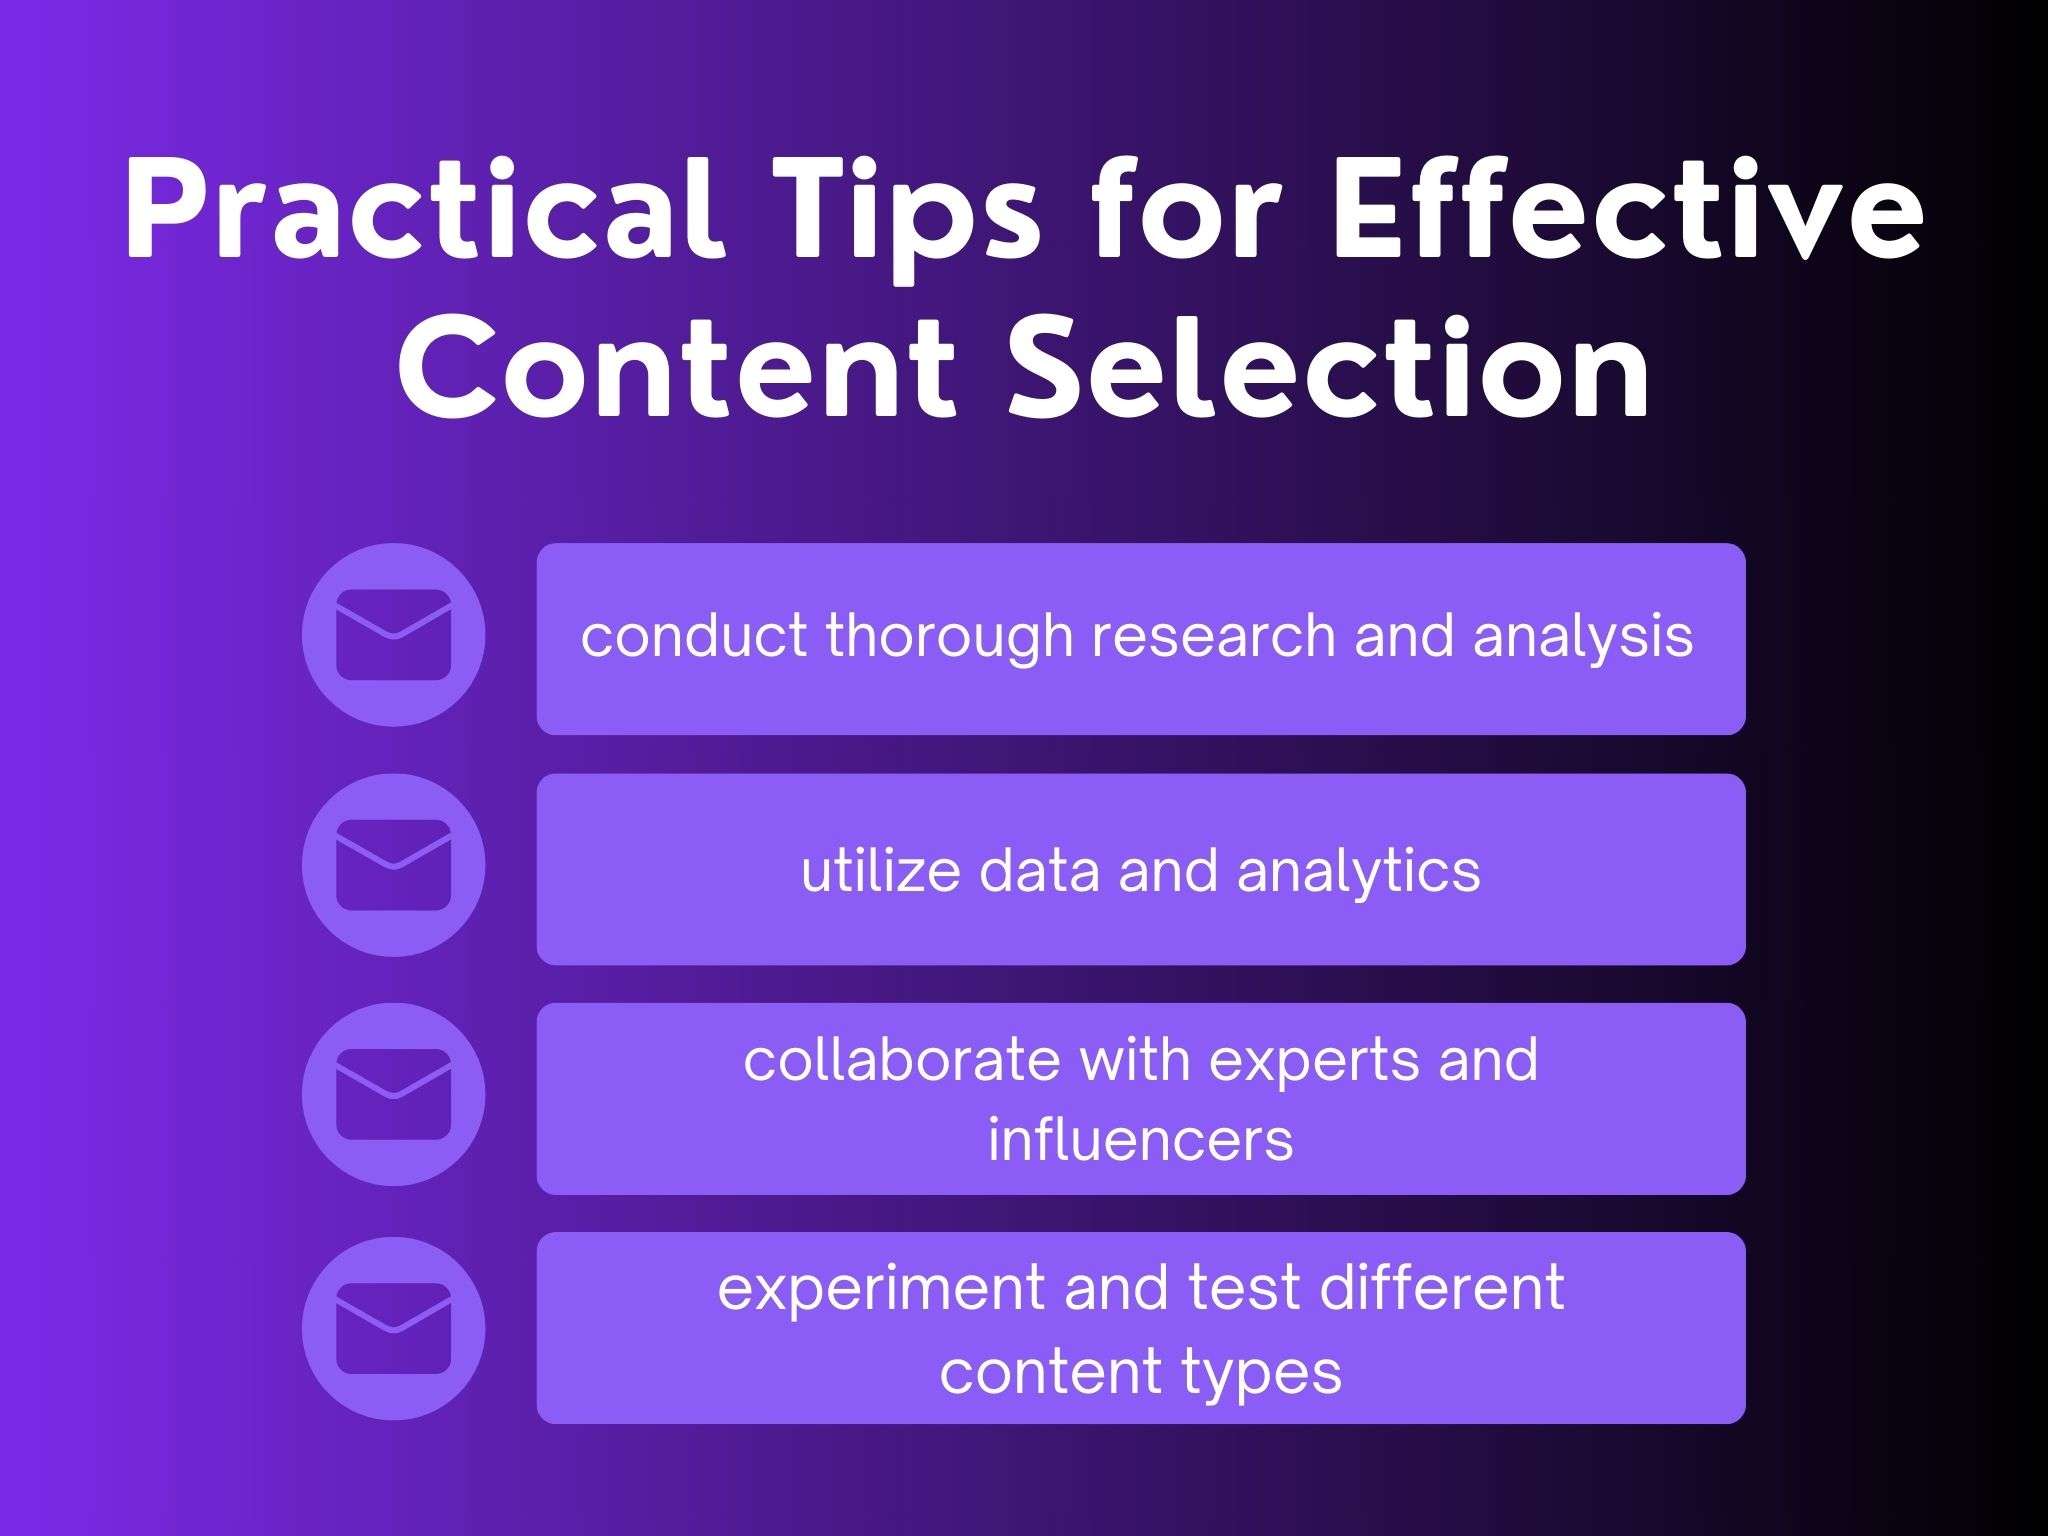 Practical tips for effective content selection